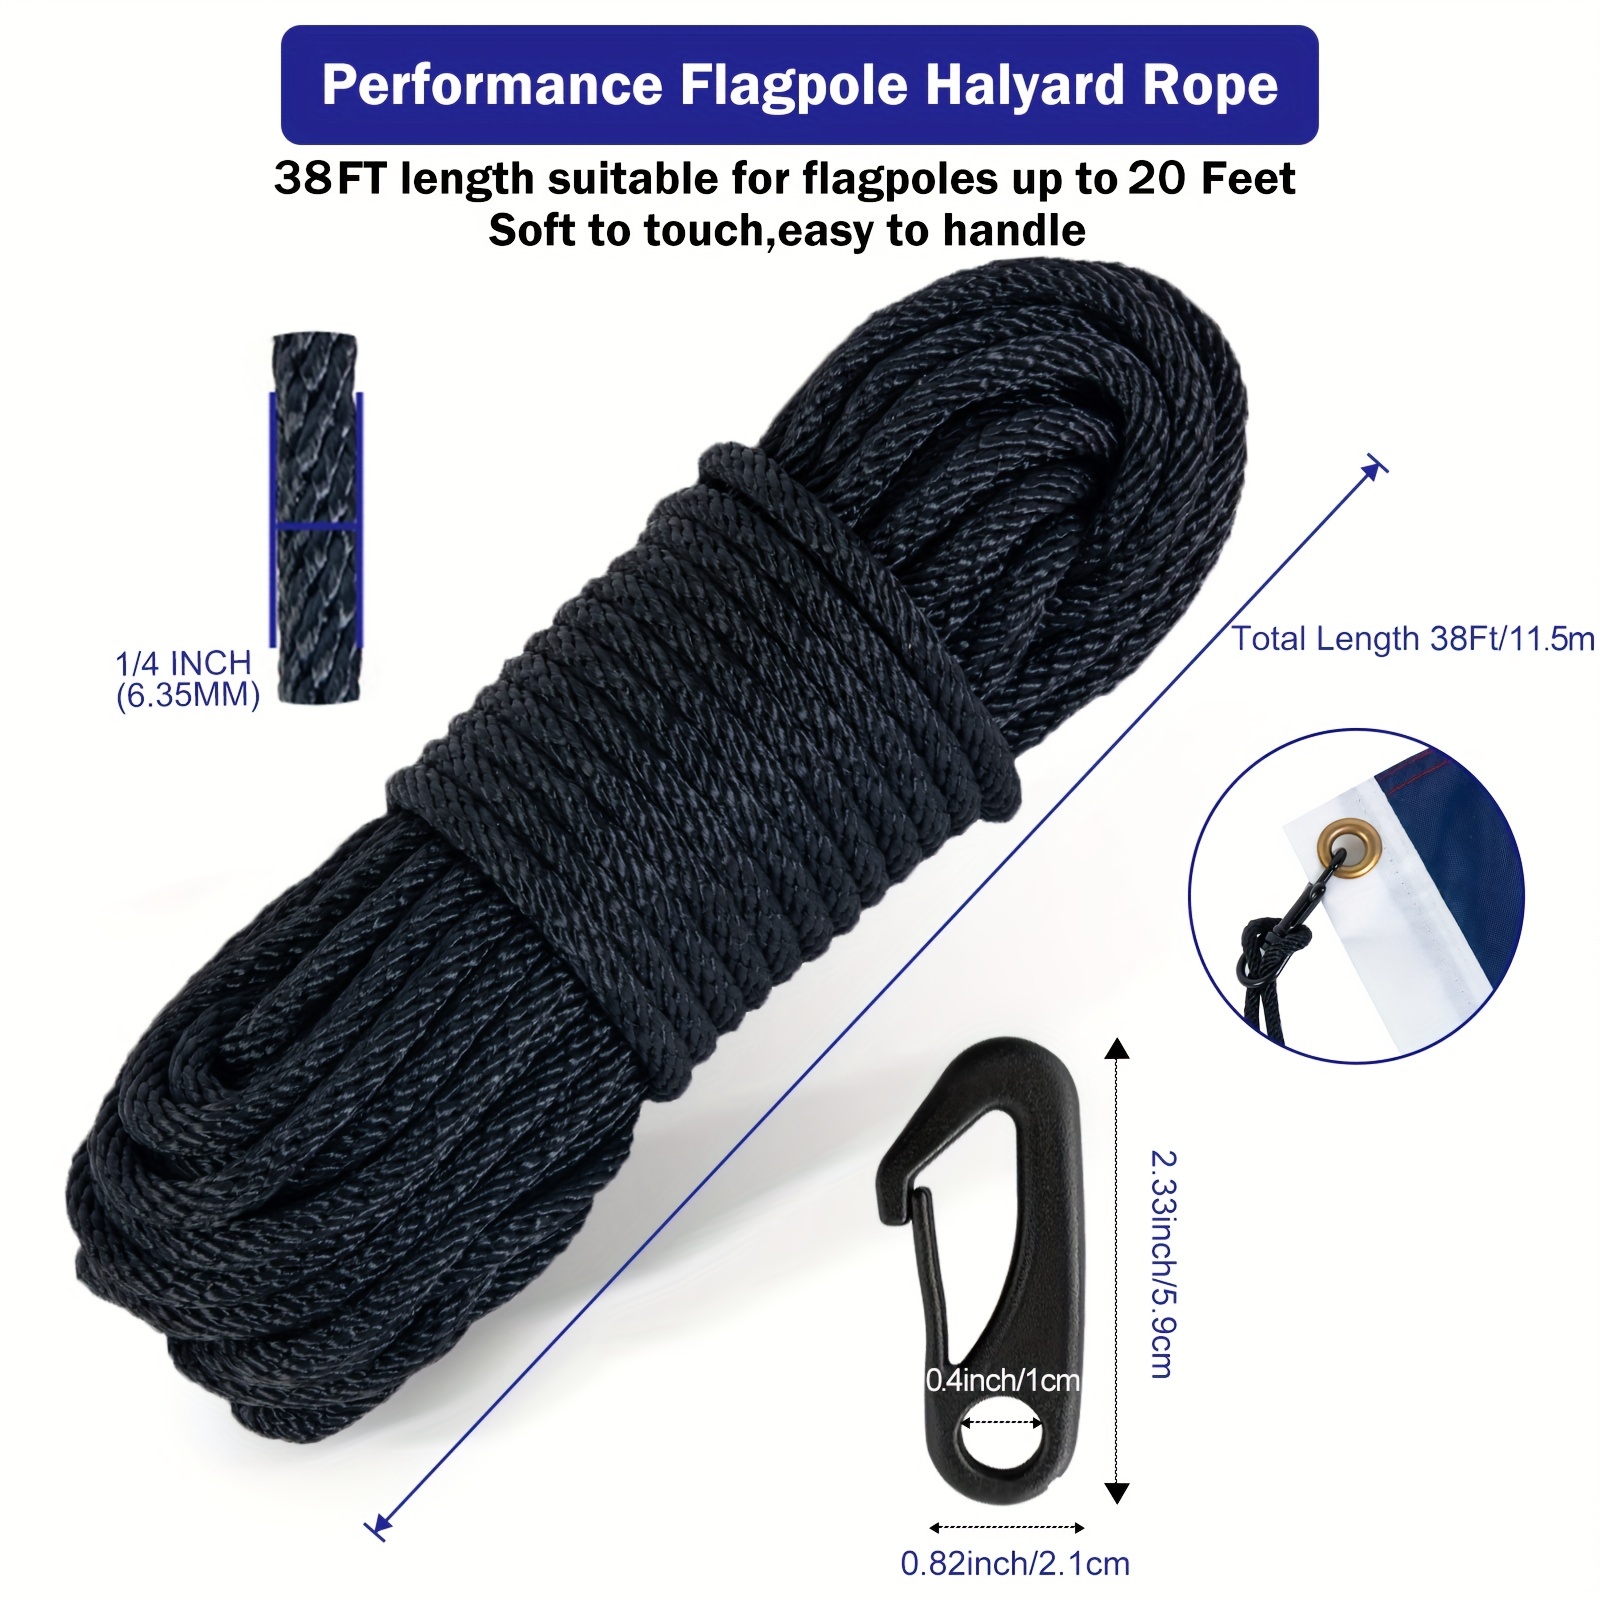  PAMASE Flag Pole Rope - 100ft Halyard Flagpole Rope  Replacement Accessories fits Flagpoles Up to 50ft, 1/4in Nylon Rope for  Outside Outdoor Clothesline Tent Craft - White : Patio, Lawn & Garden